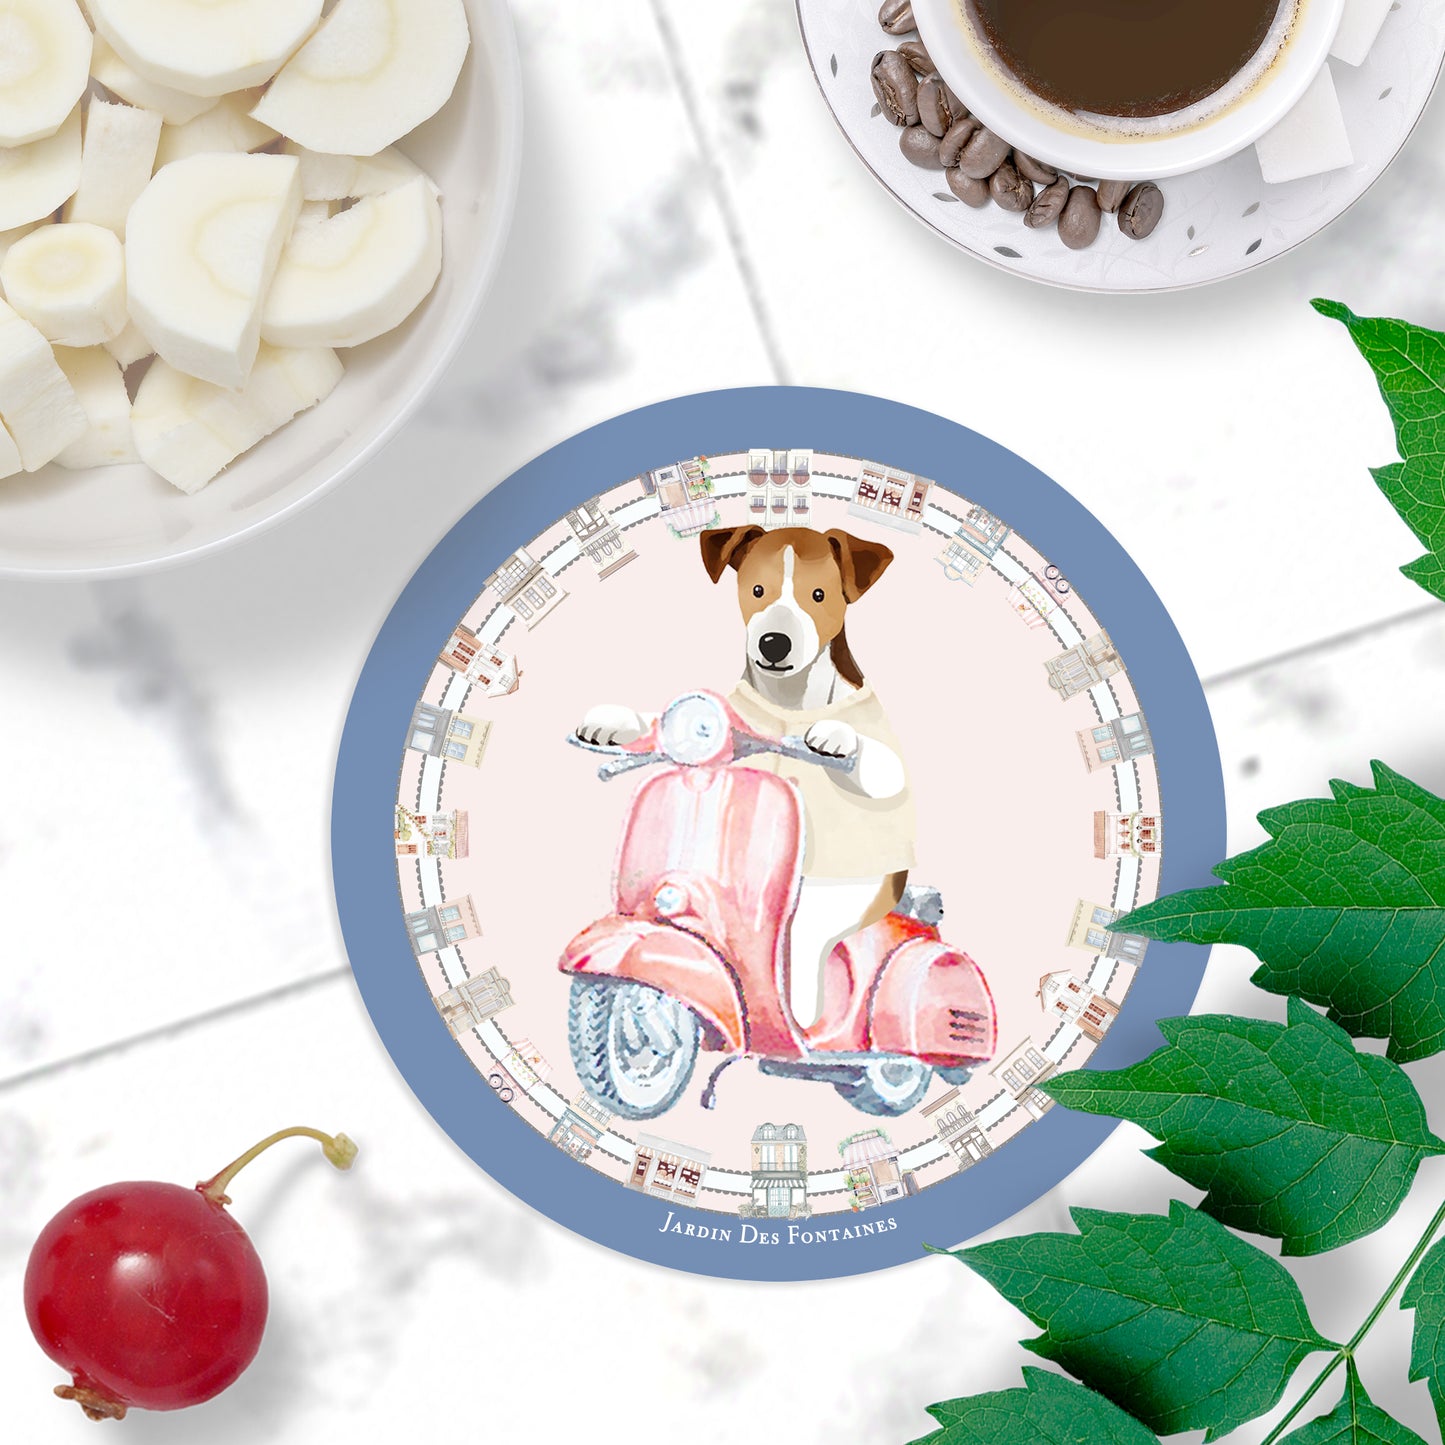 "Oh My Dog" Jack Russell & Vespa Scooter Ceramic Coaster